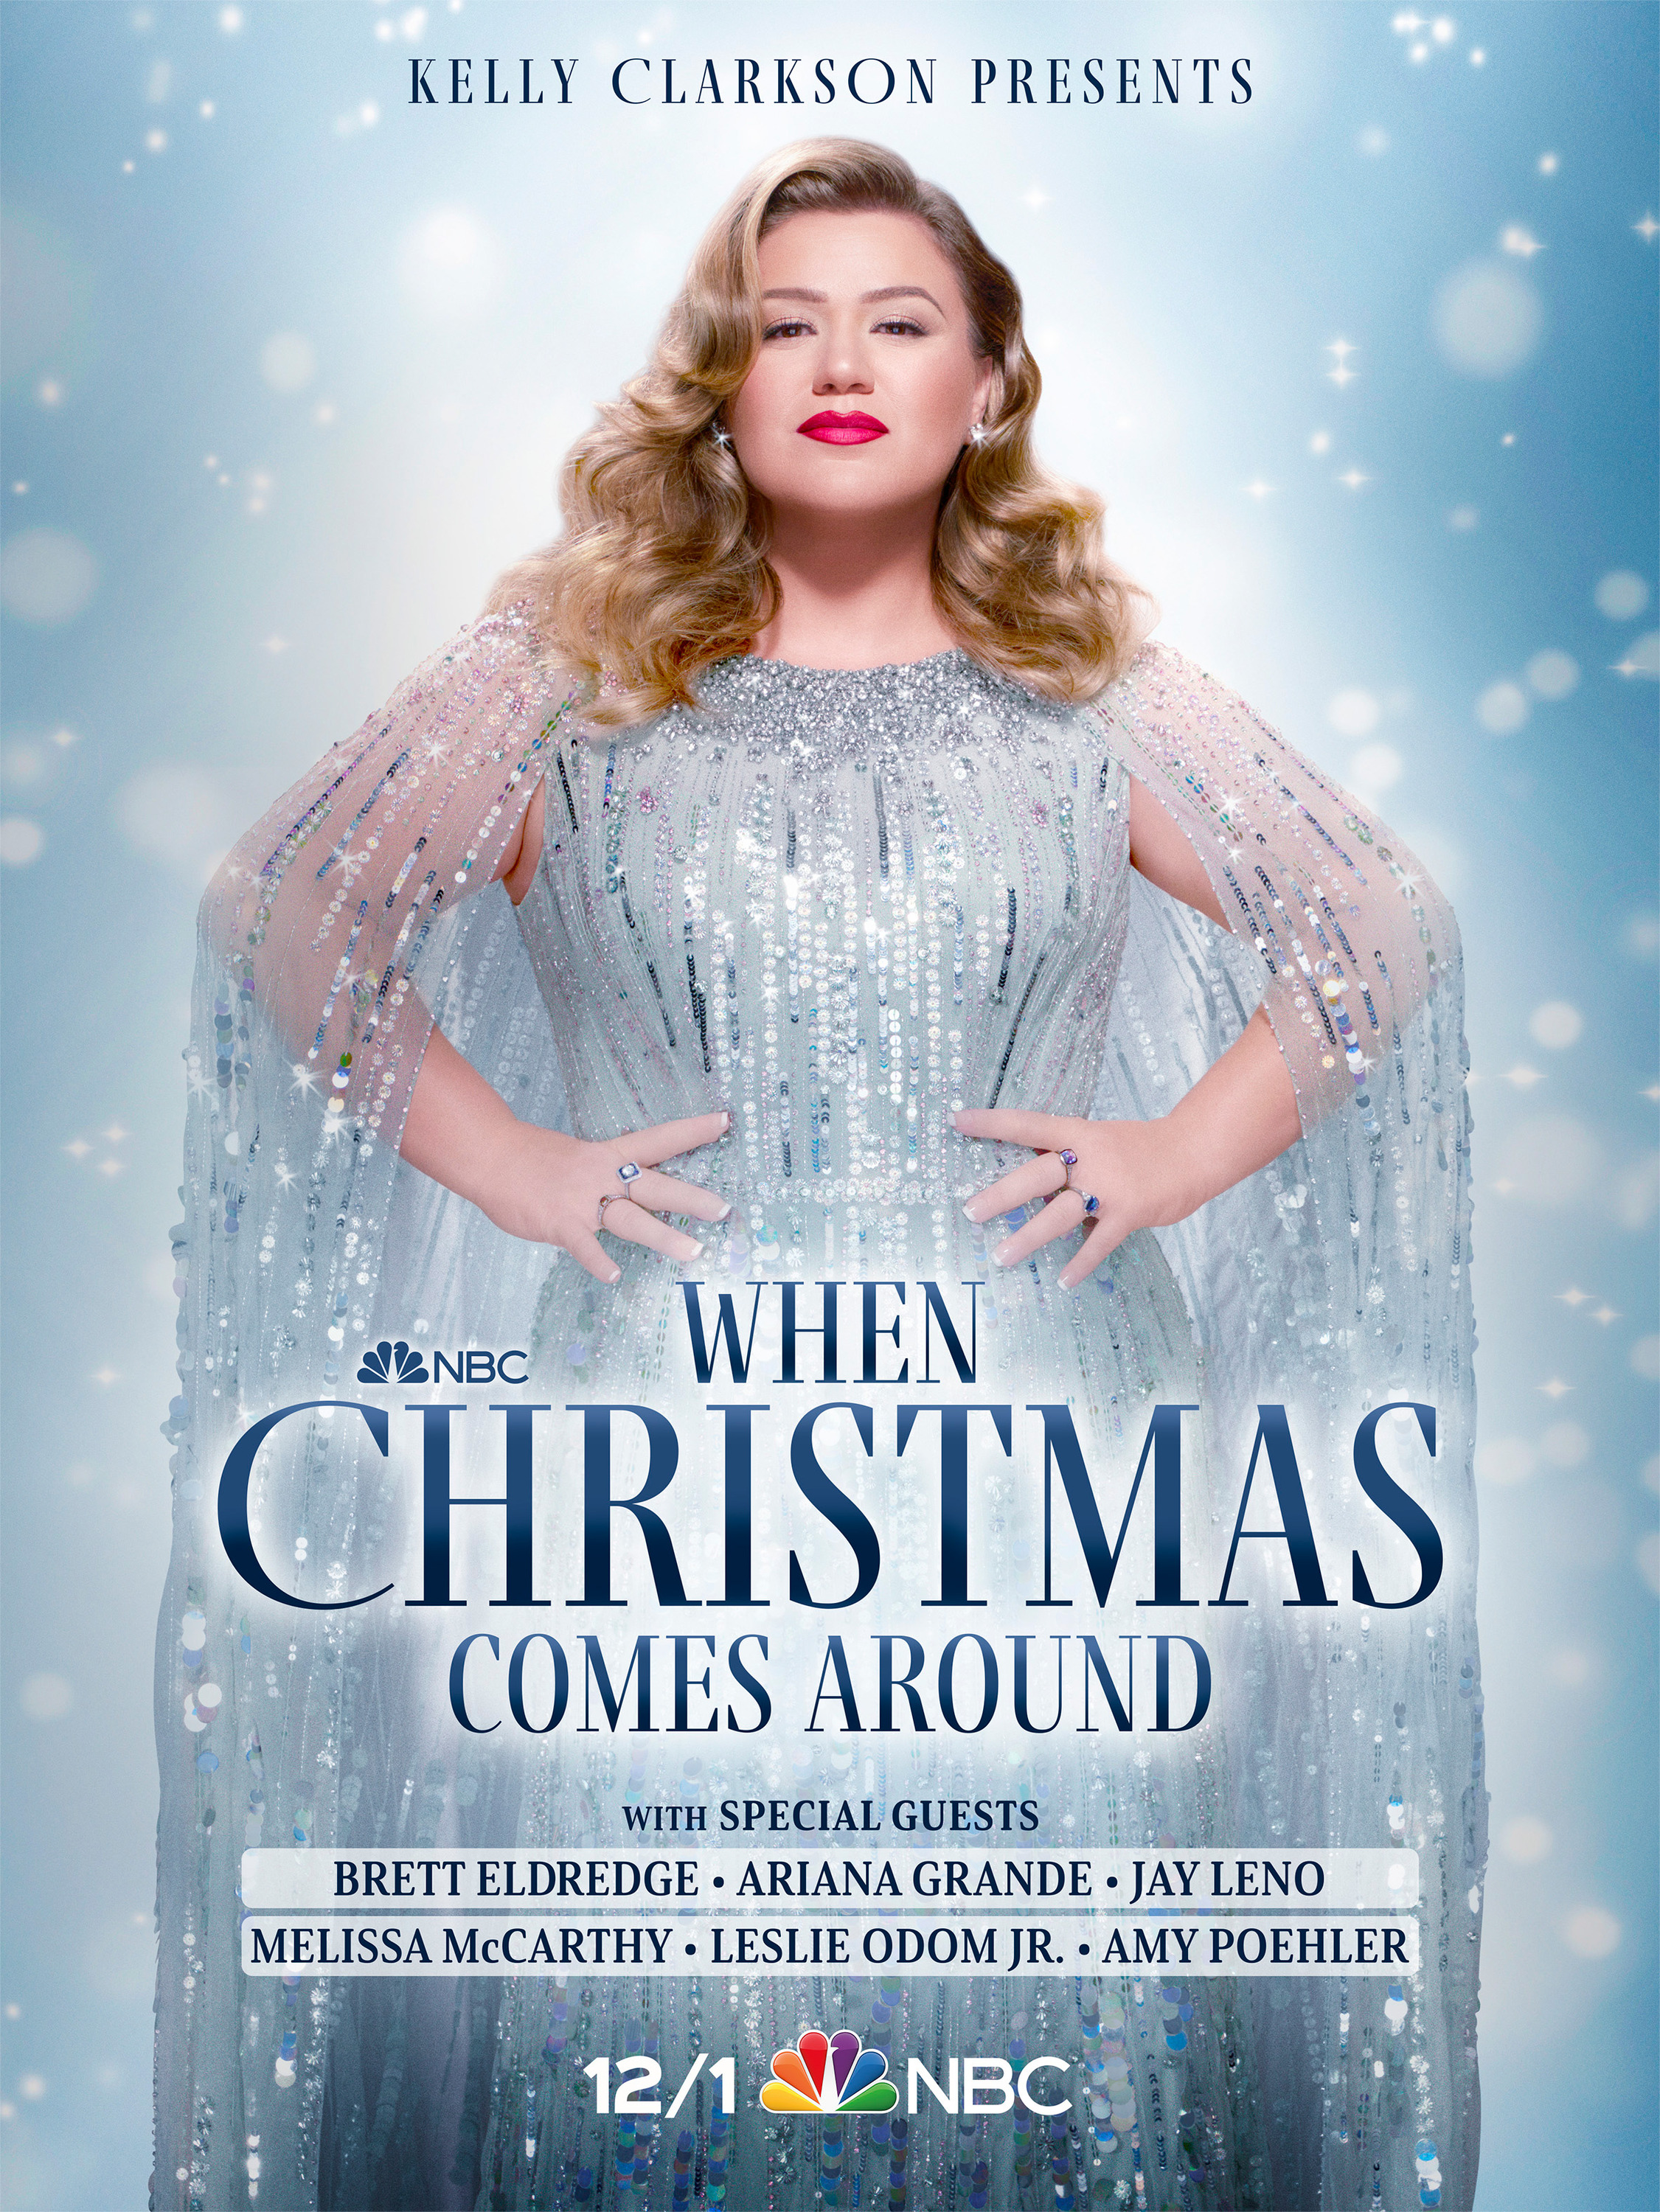 Mega Sized TV Poster Image for Kelly Clarkson Presents: When Christmas Comes Around 